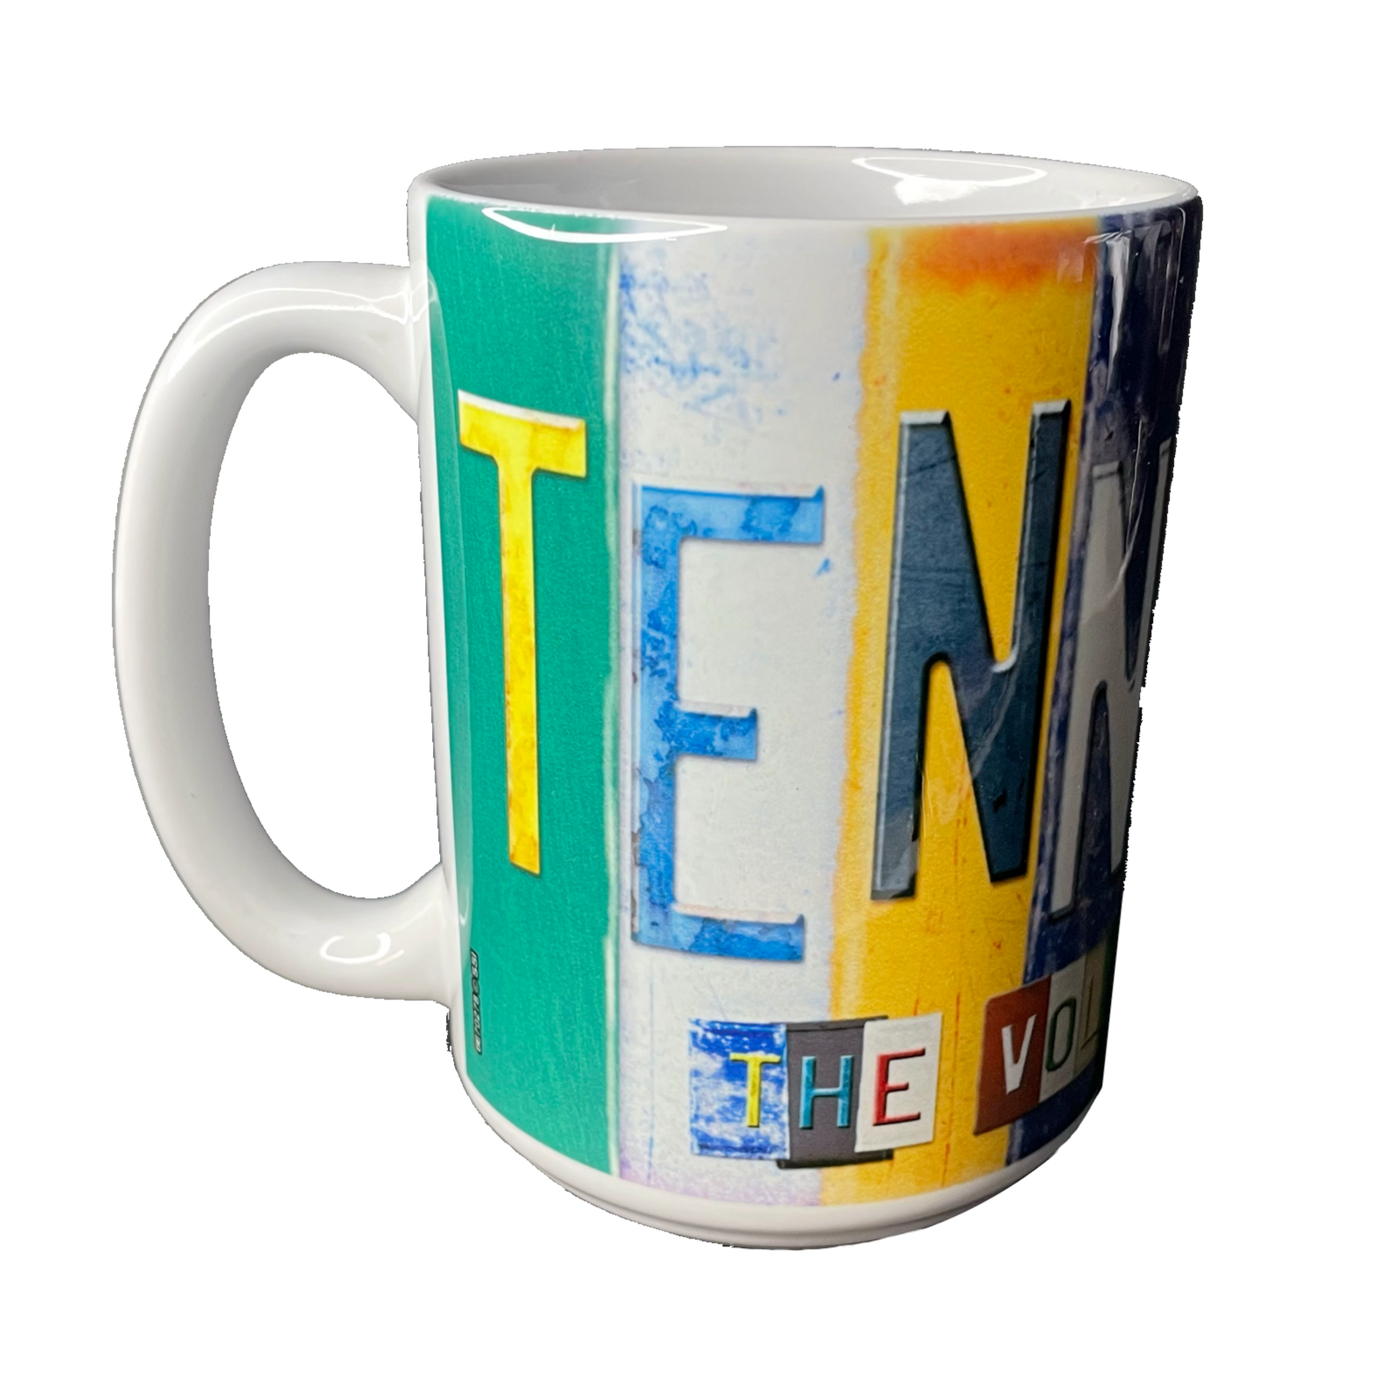 Enjoy your favorite coffee in this Tennessee coffee mug! White ceramic coffee mug with license plate letters spelling out "TENNESSEE".  Available online or in our shop just outside Nashville in Smyrna, TN. 